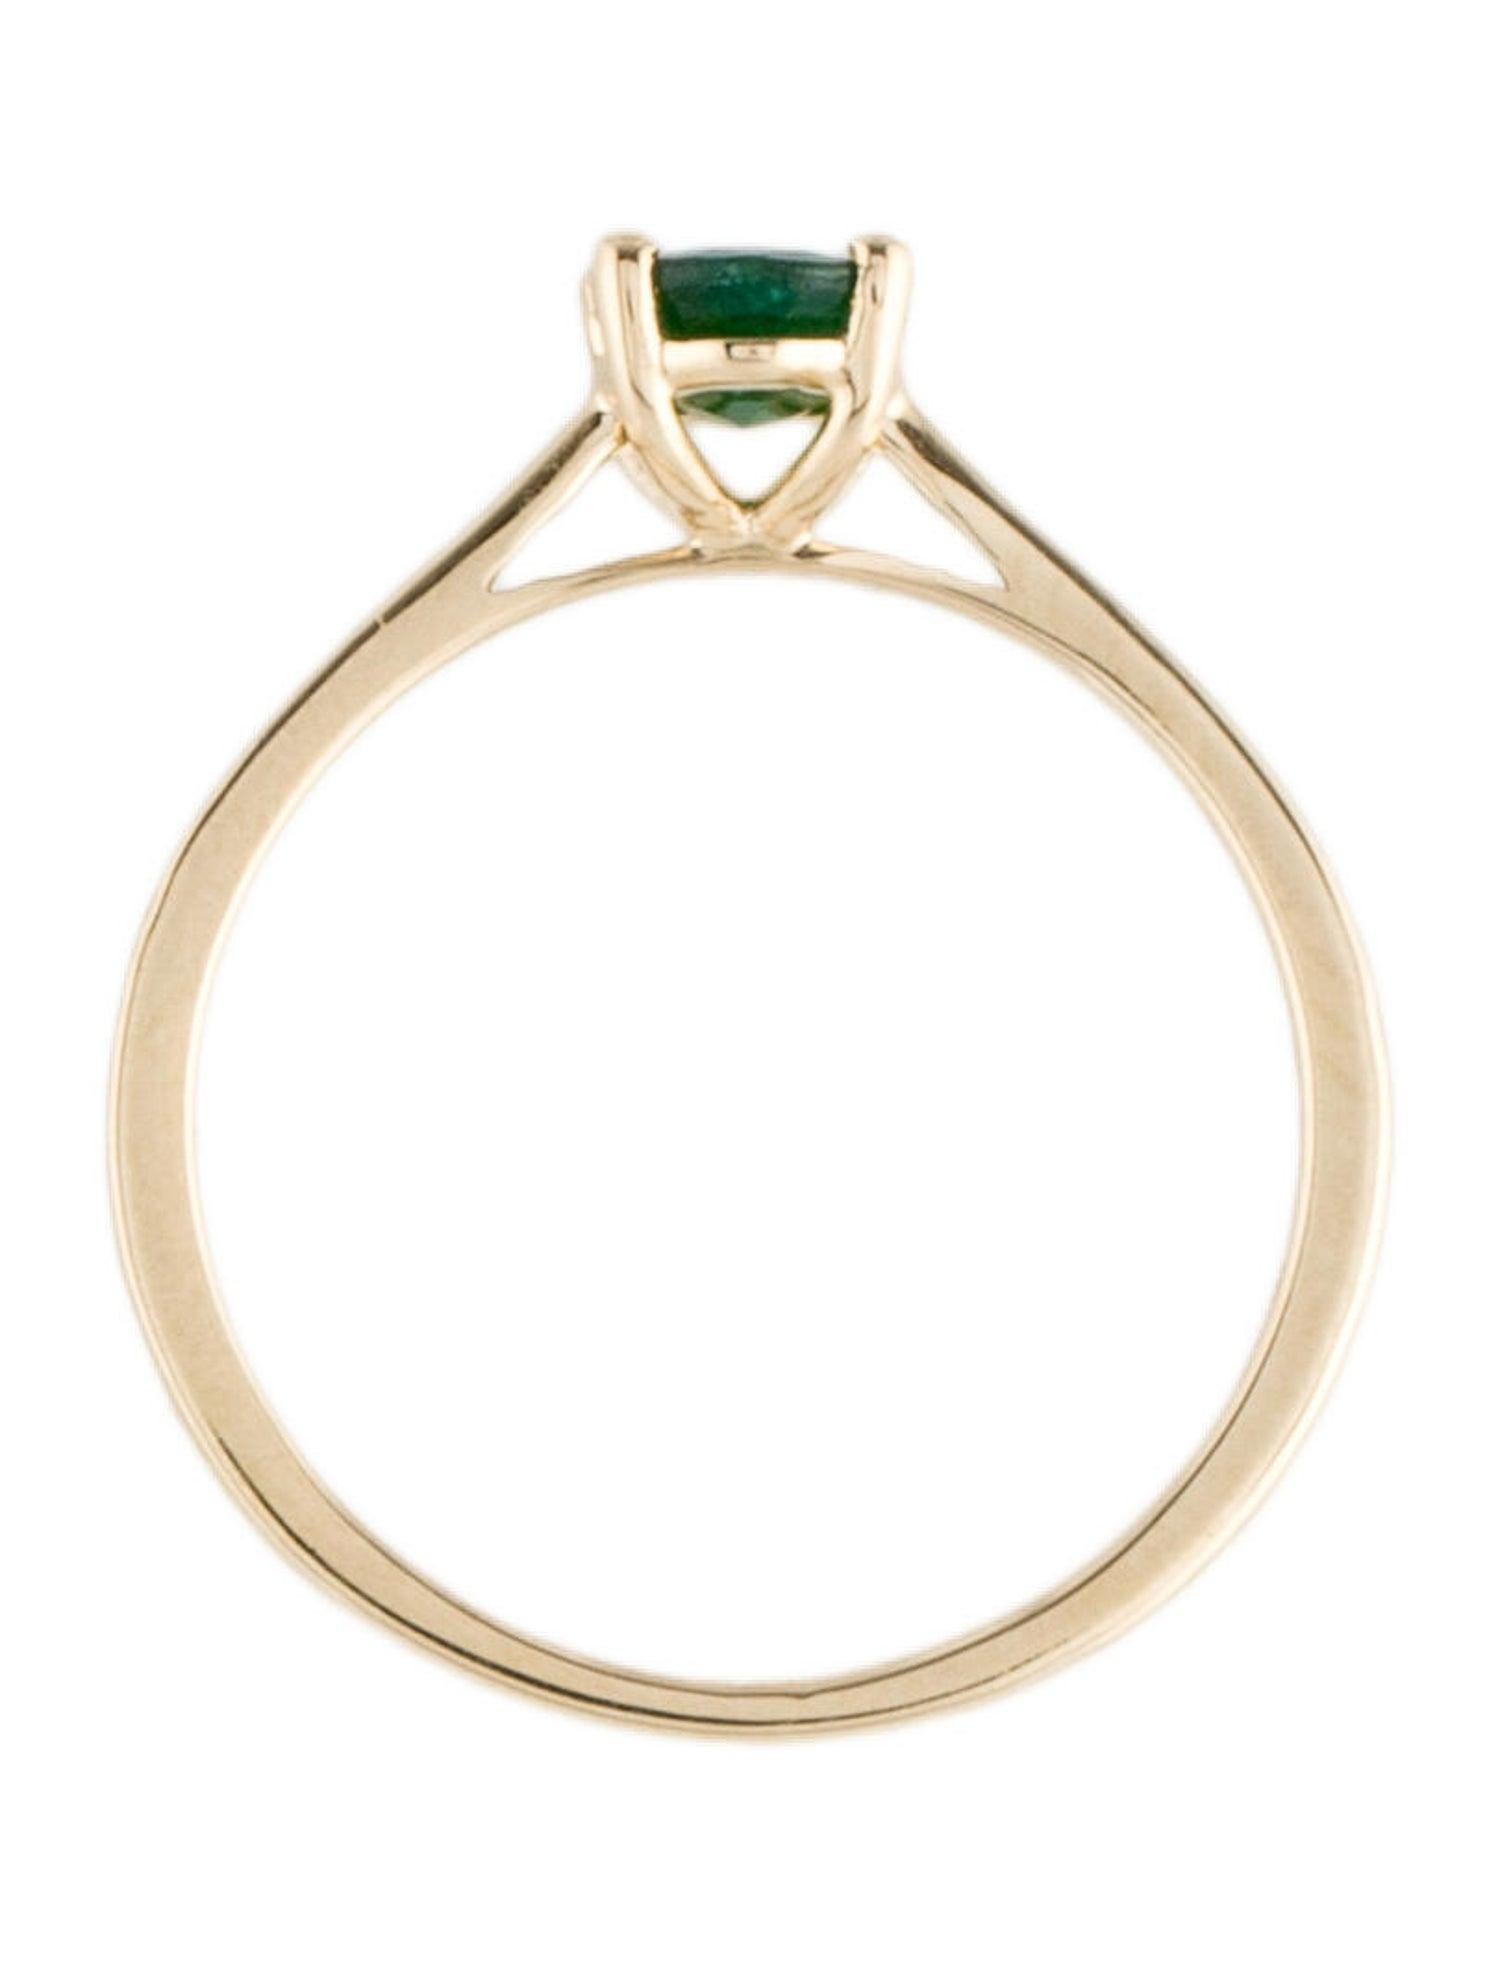 14K Emerald Cocktail Ring - Size 7 - Timeless Elegance & Luxury Statement Piece In New Condition For Sale In Holtsville, NY